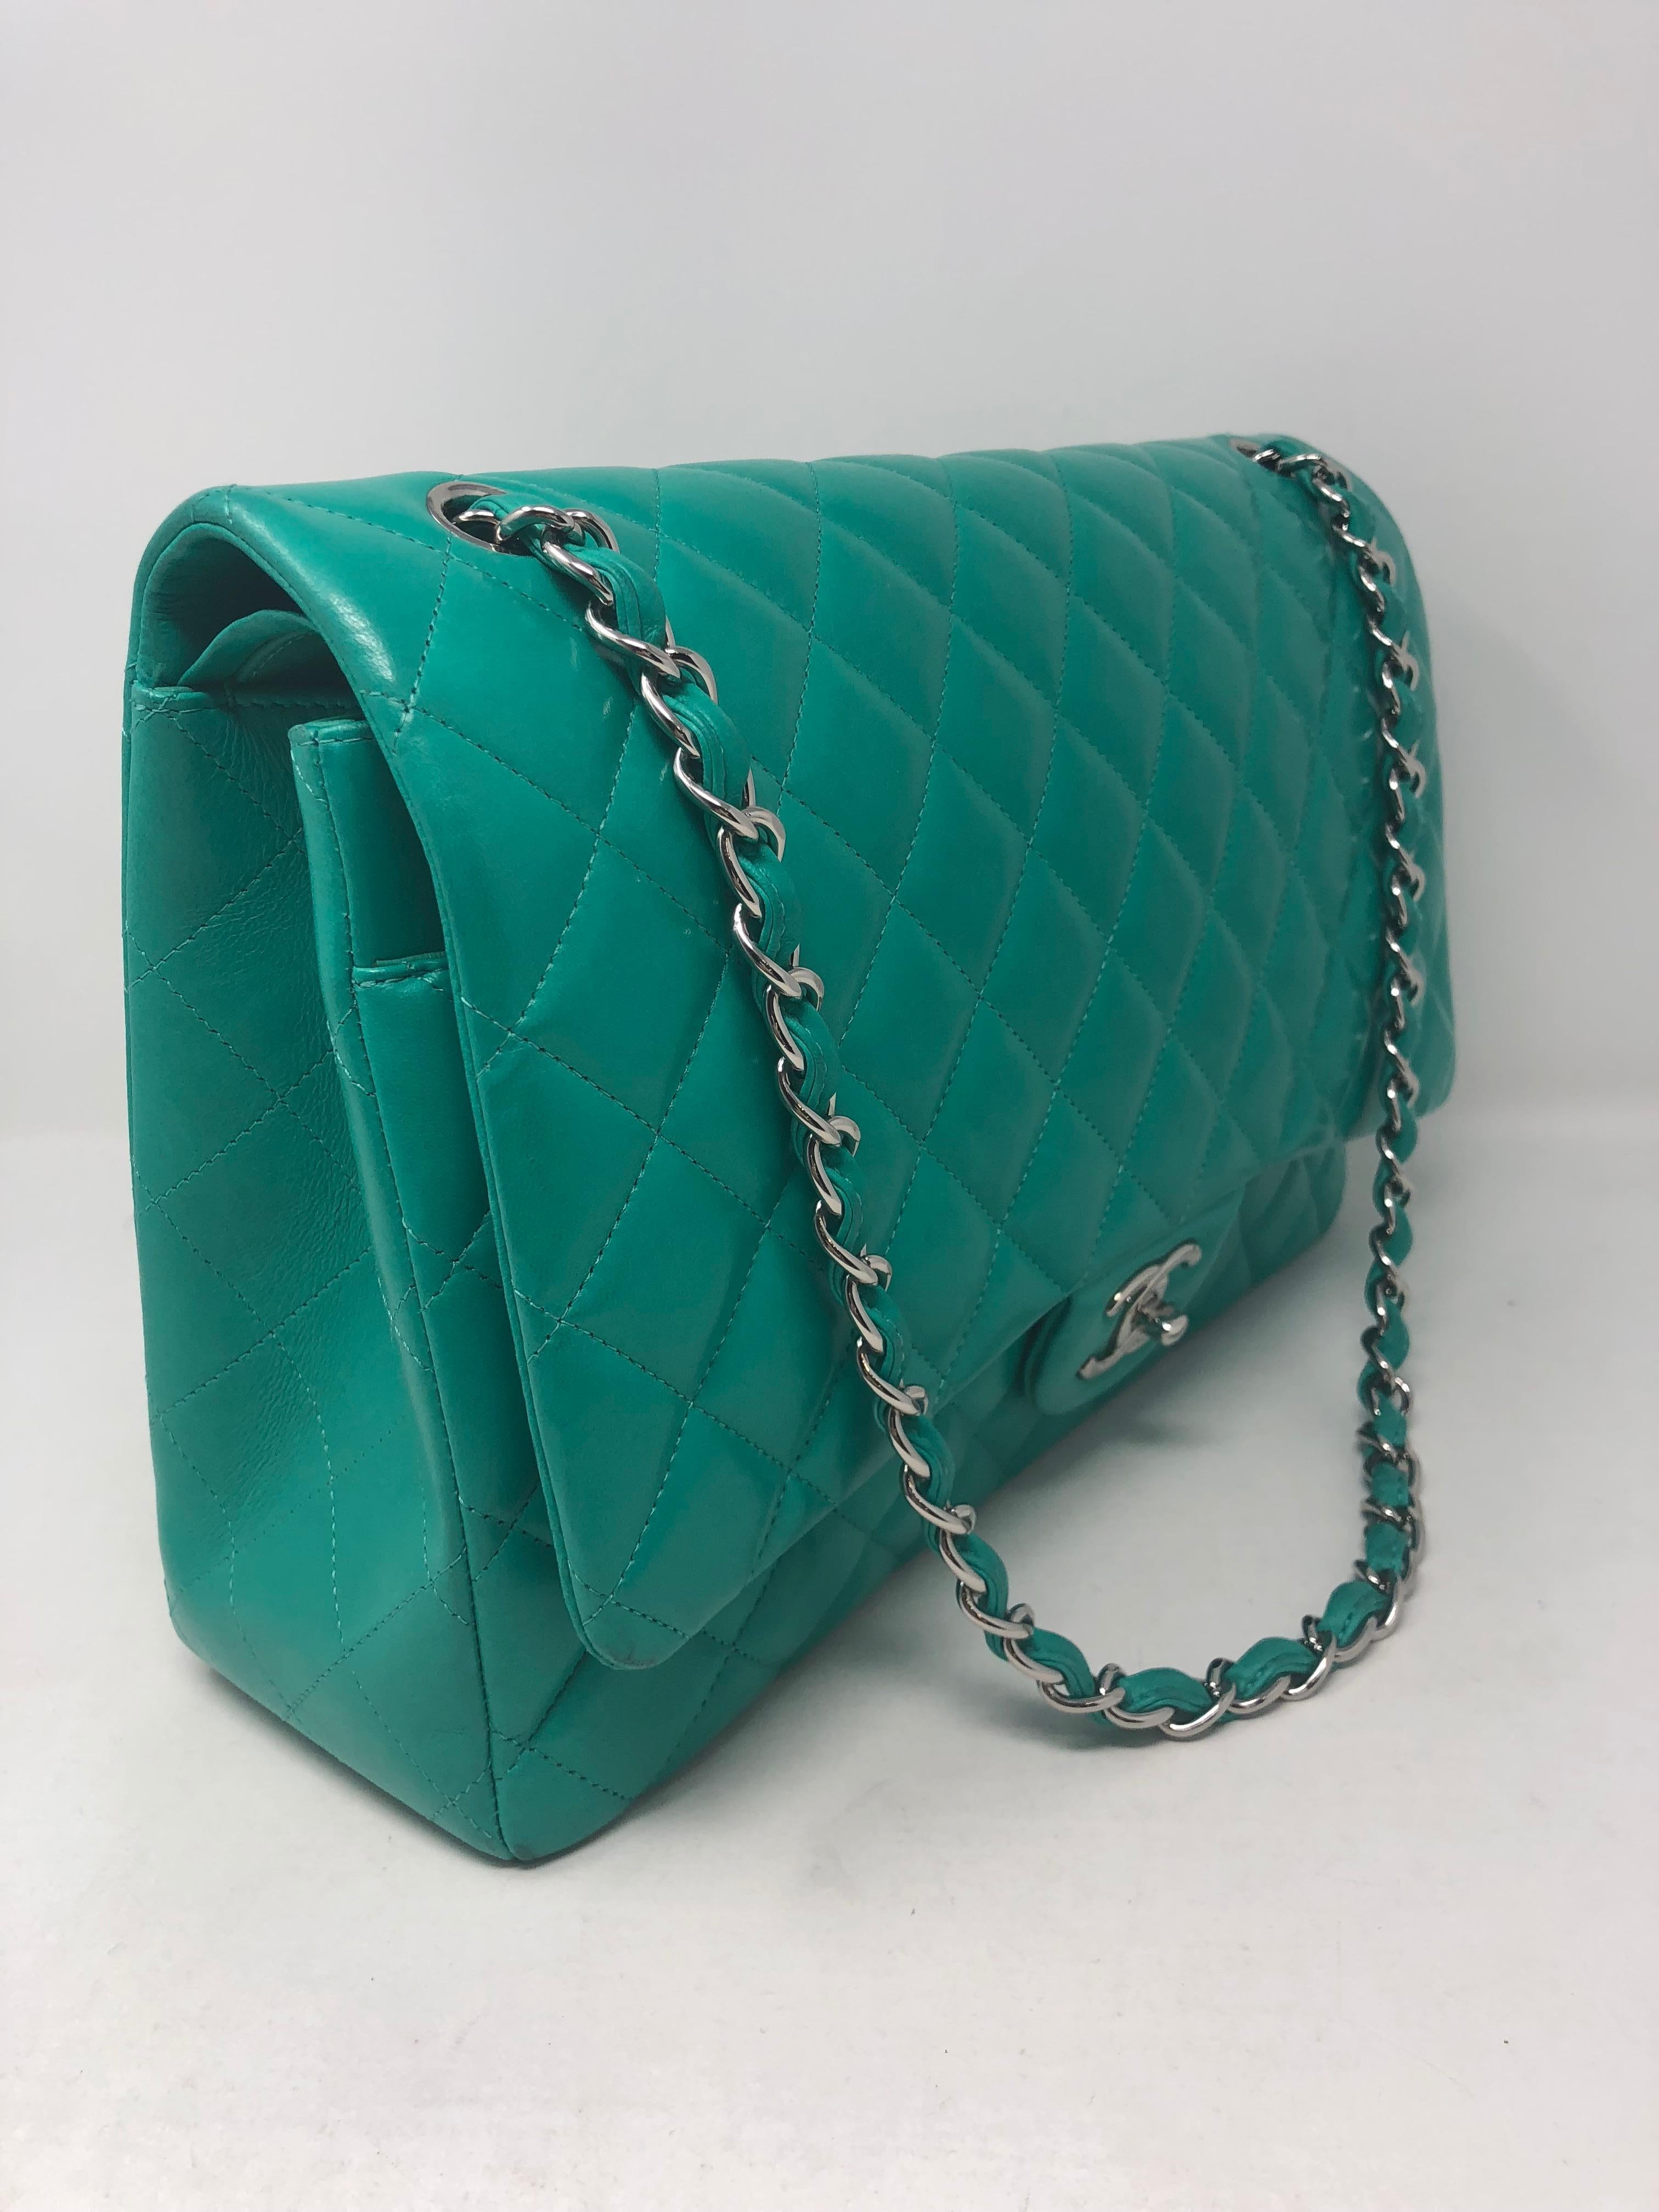 Women's or Men's Chanel Menthe Green Leather Maxi Bag 